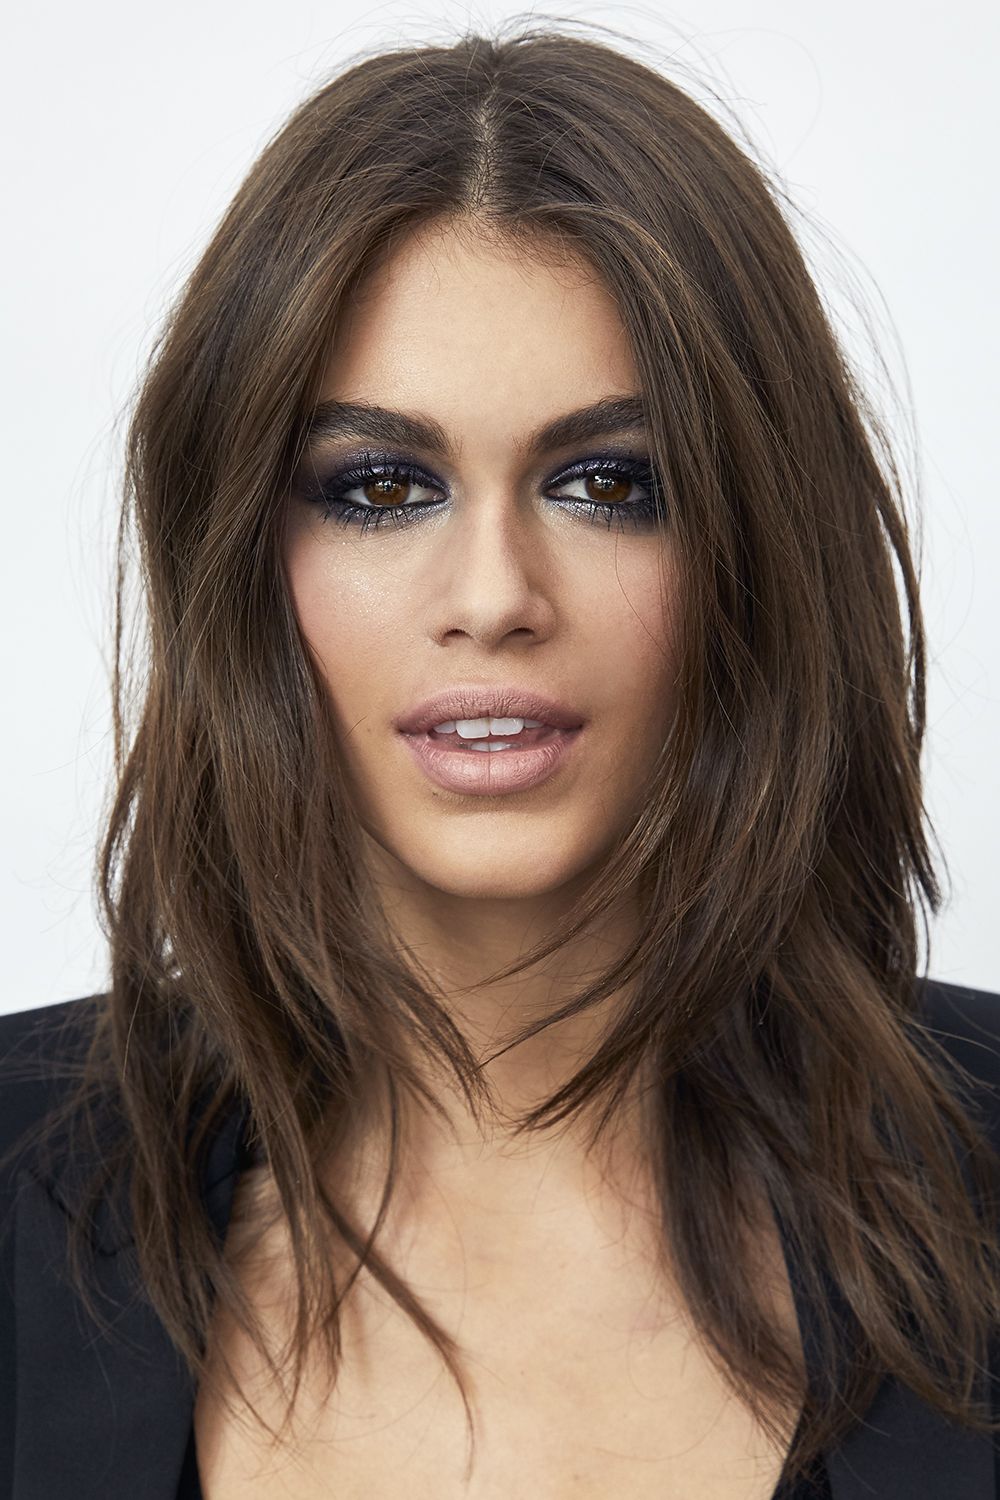 Model Kaia Gerber Is The 17-Year-Old Face Of YSL Beauty Kaia Gerber ...